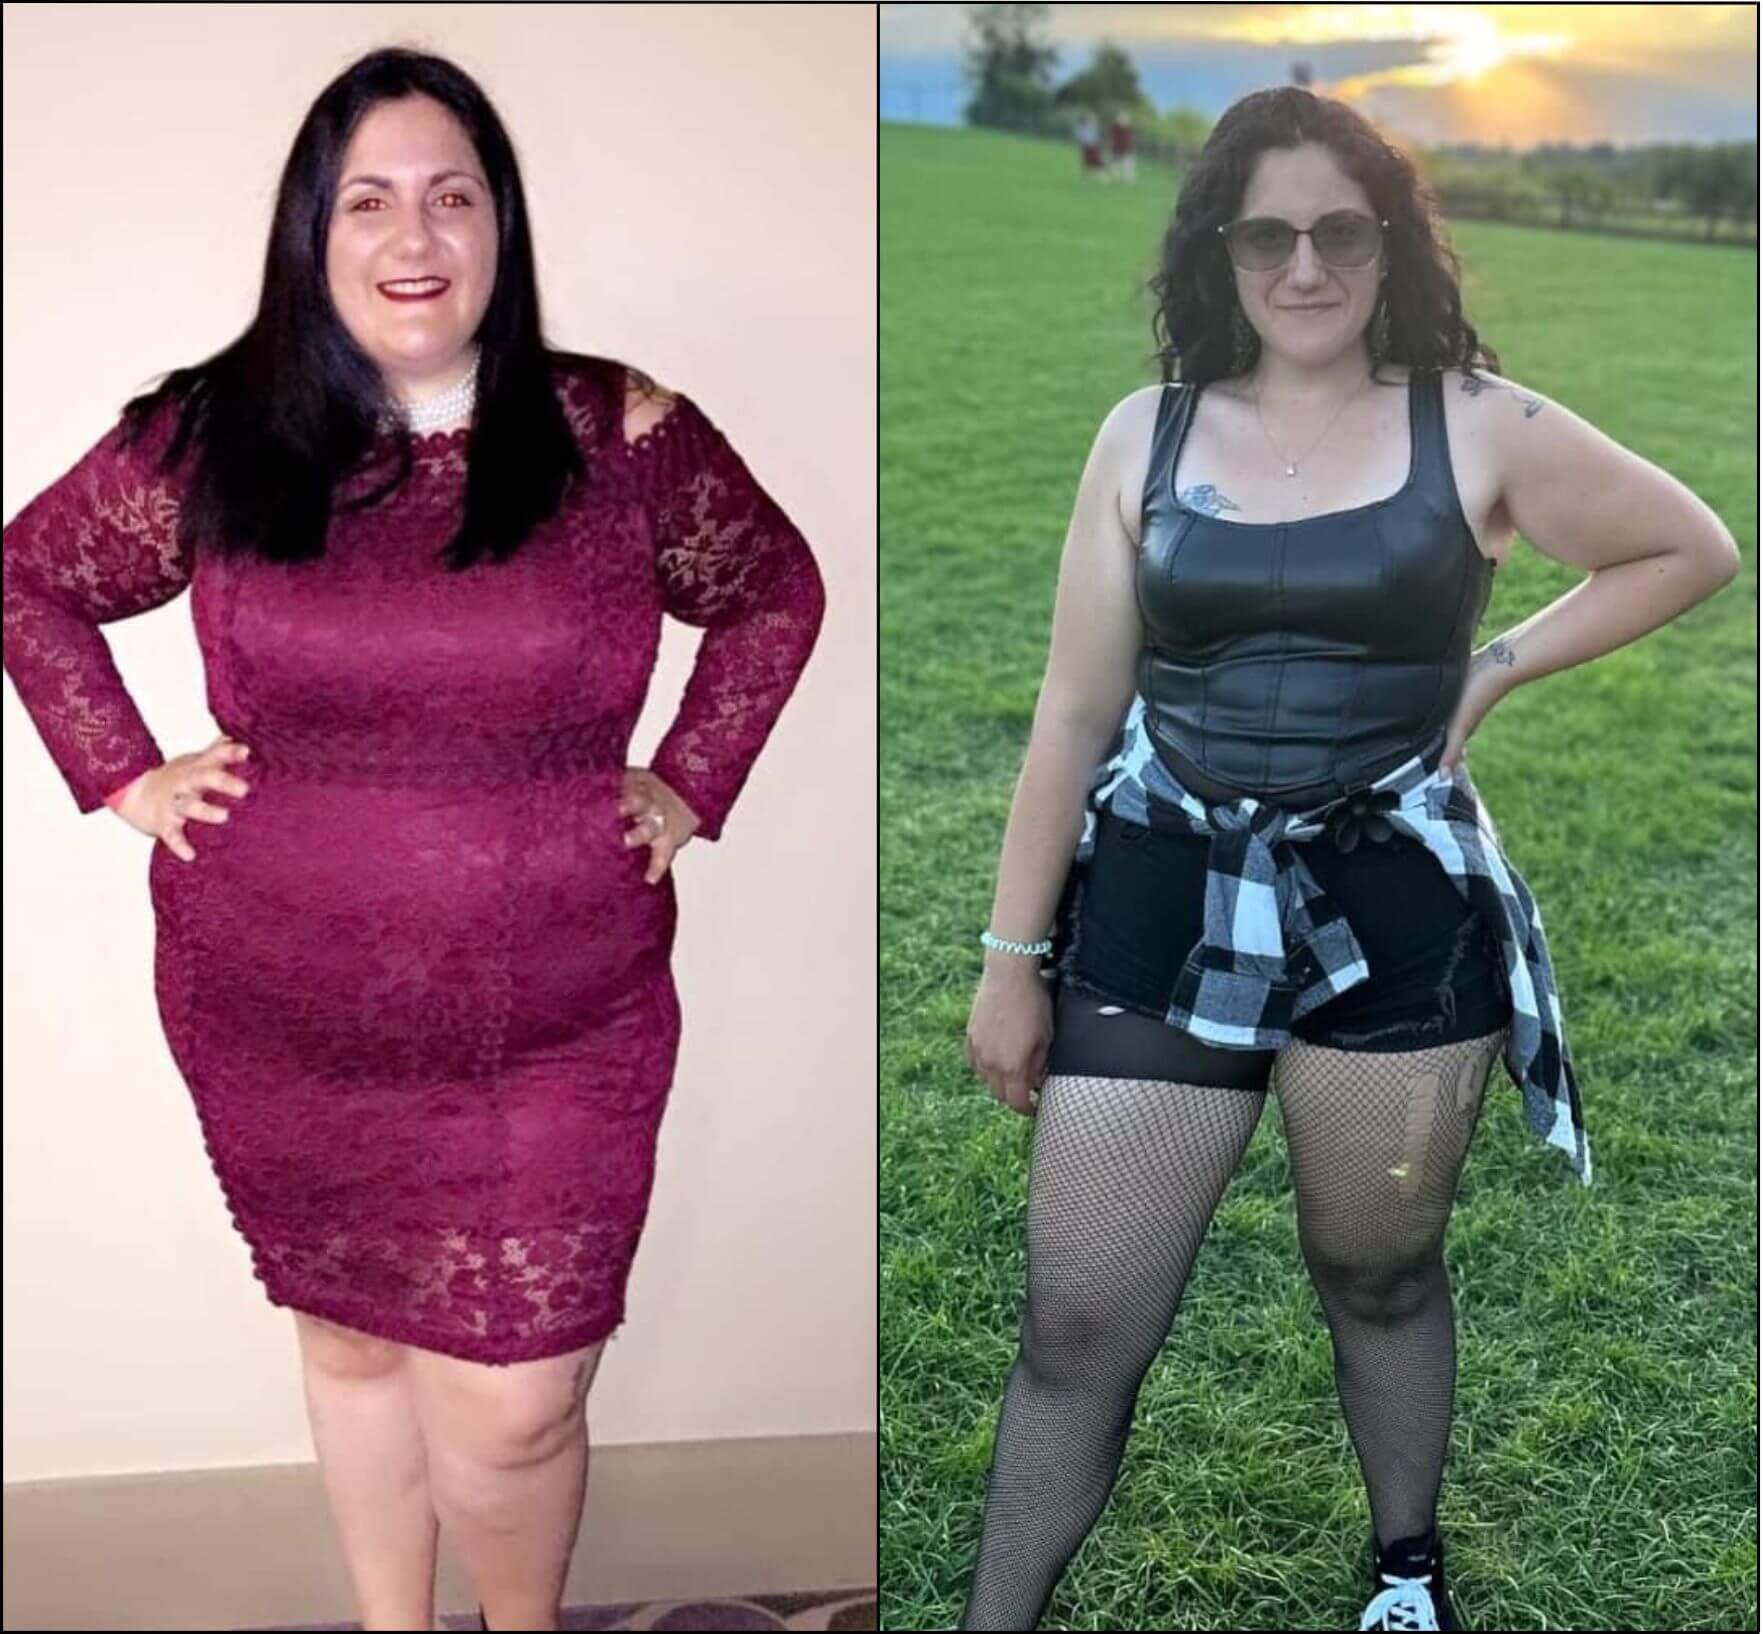 Two pictures of a woman posing before and after a weight loss.